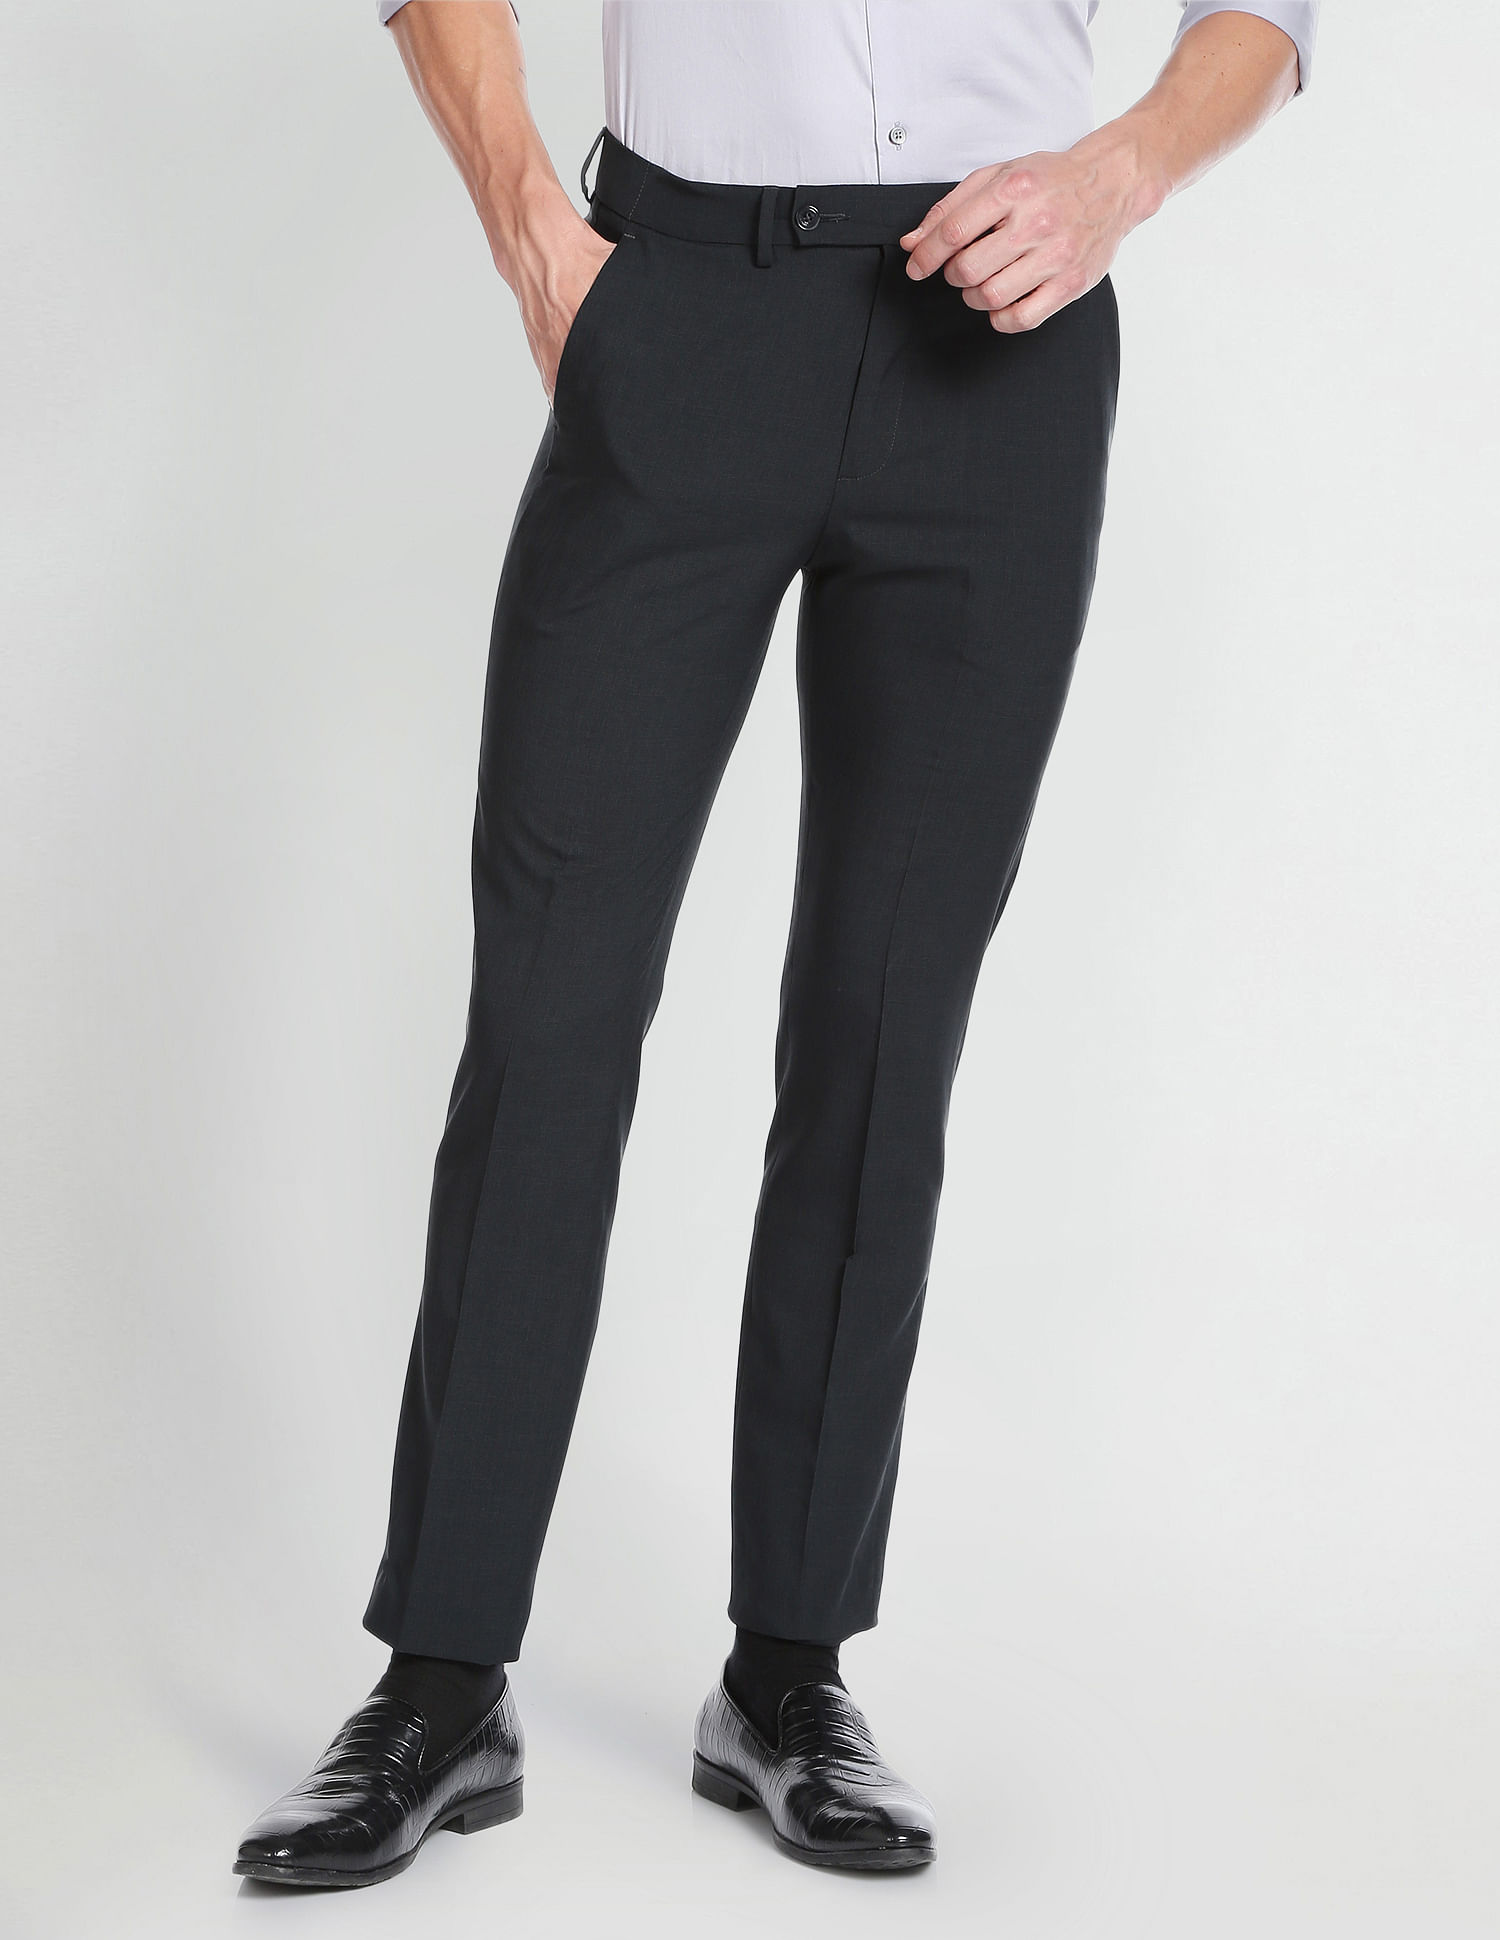 Men Formal Flared Bell Bottom Dress Pants Stretch Smart Casual Trousers  Bootcut | eBay